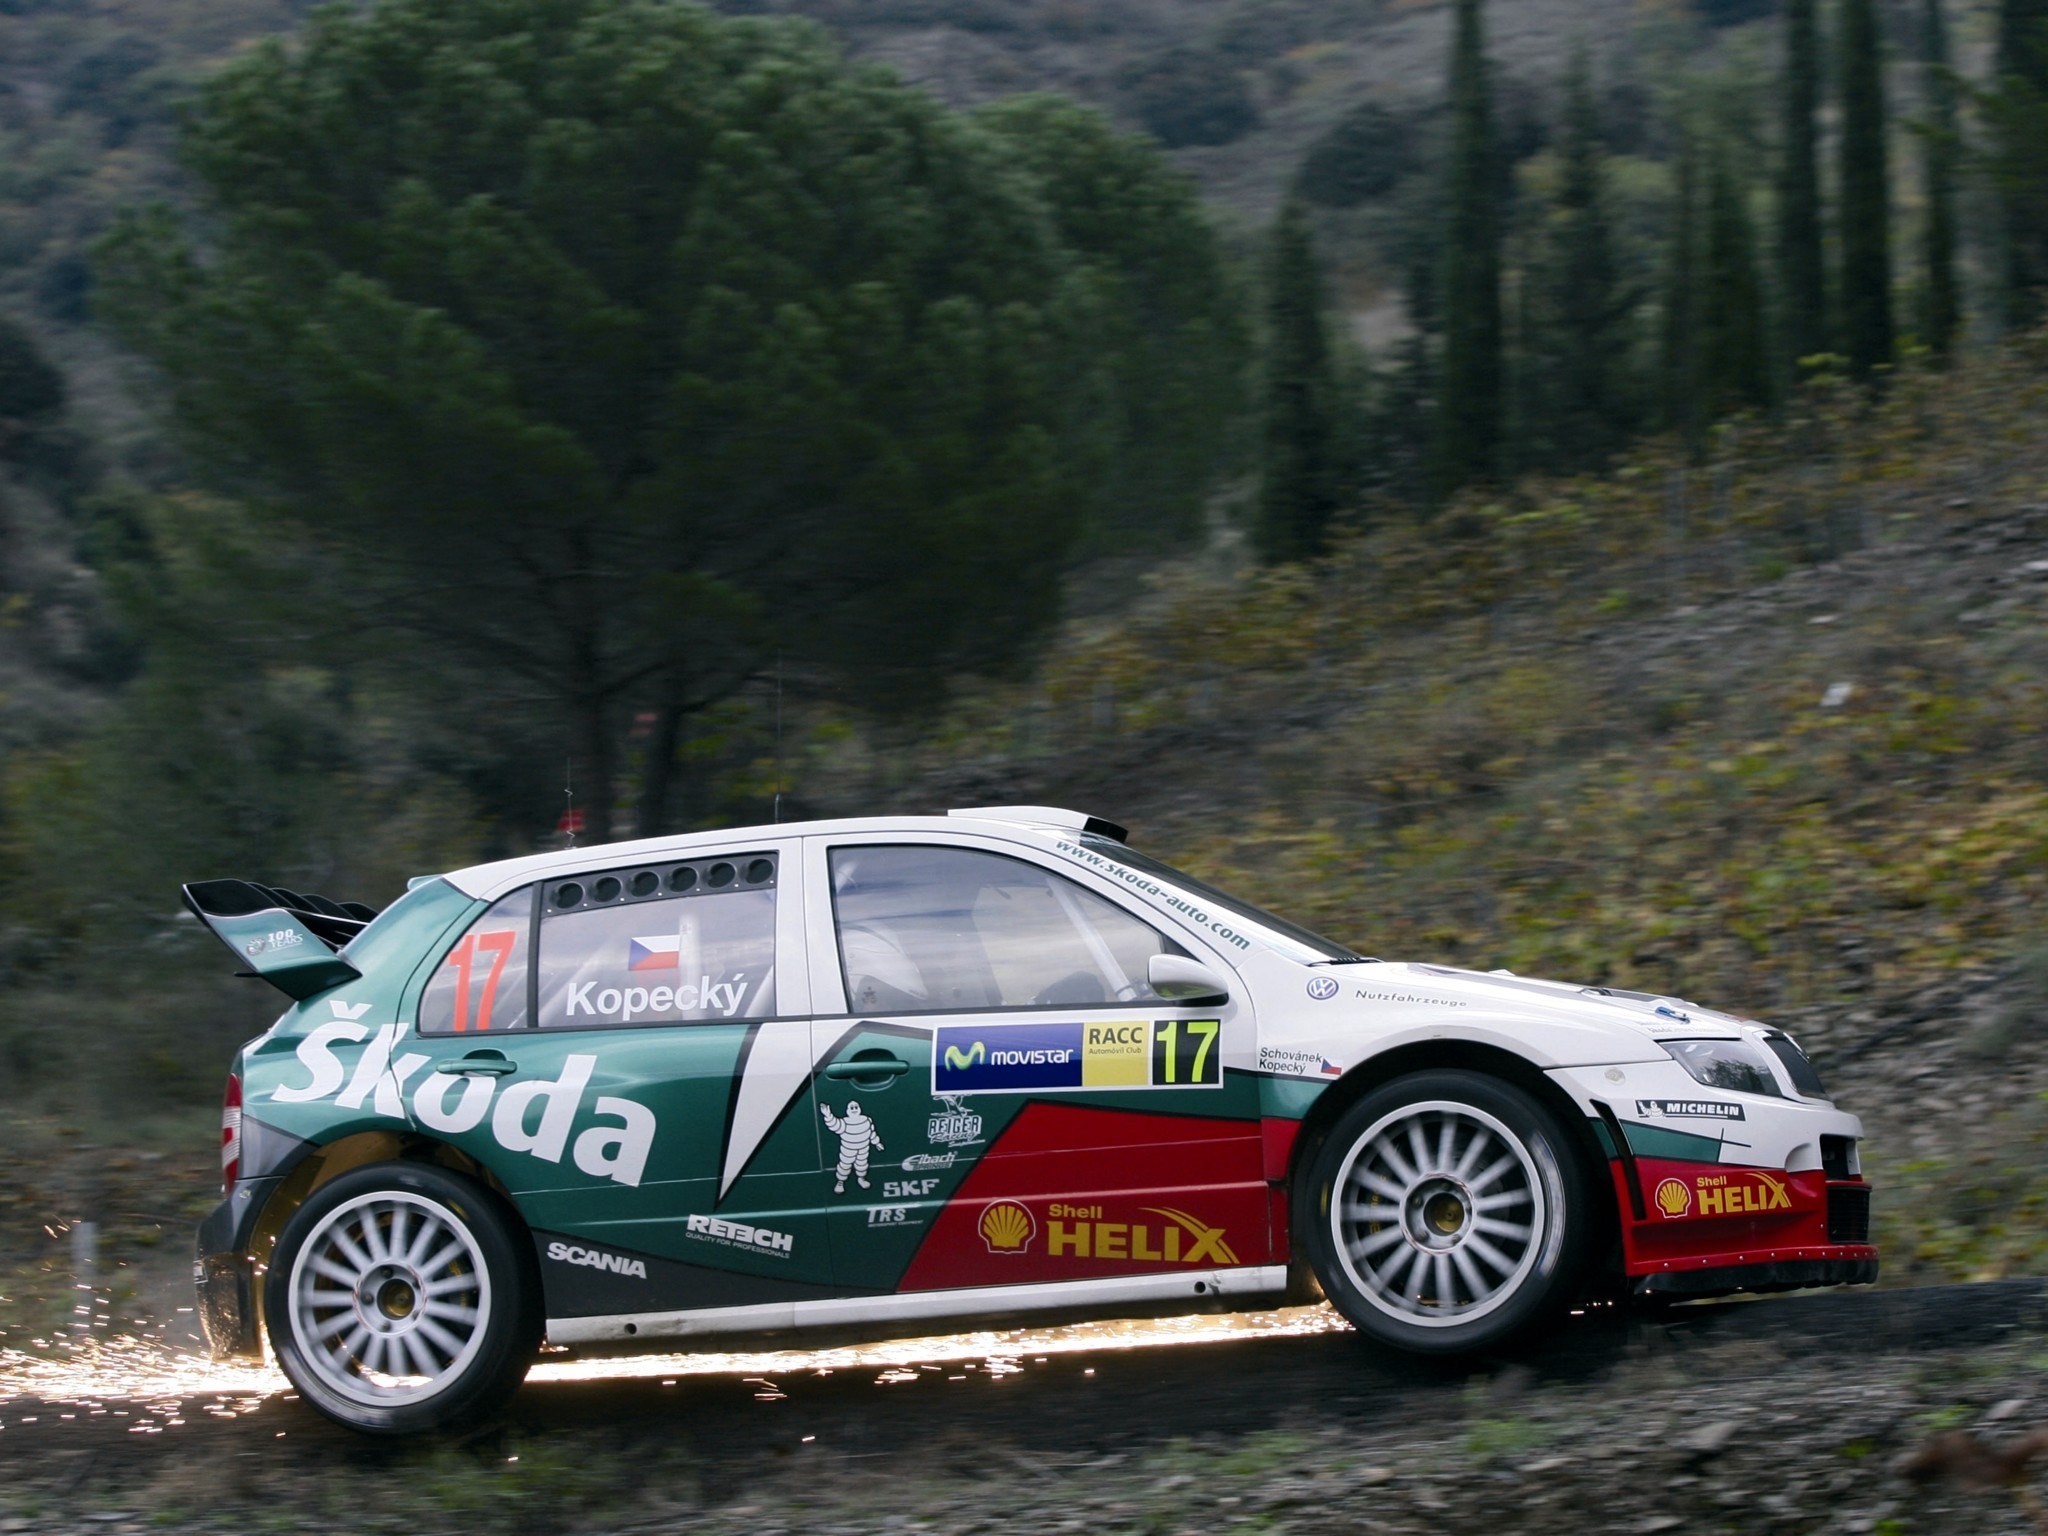 2048x1536 Faulkner Sinclair - wrc racing picture - Full HD Wallpapers, Photos -   px